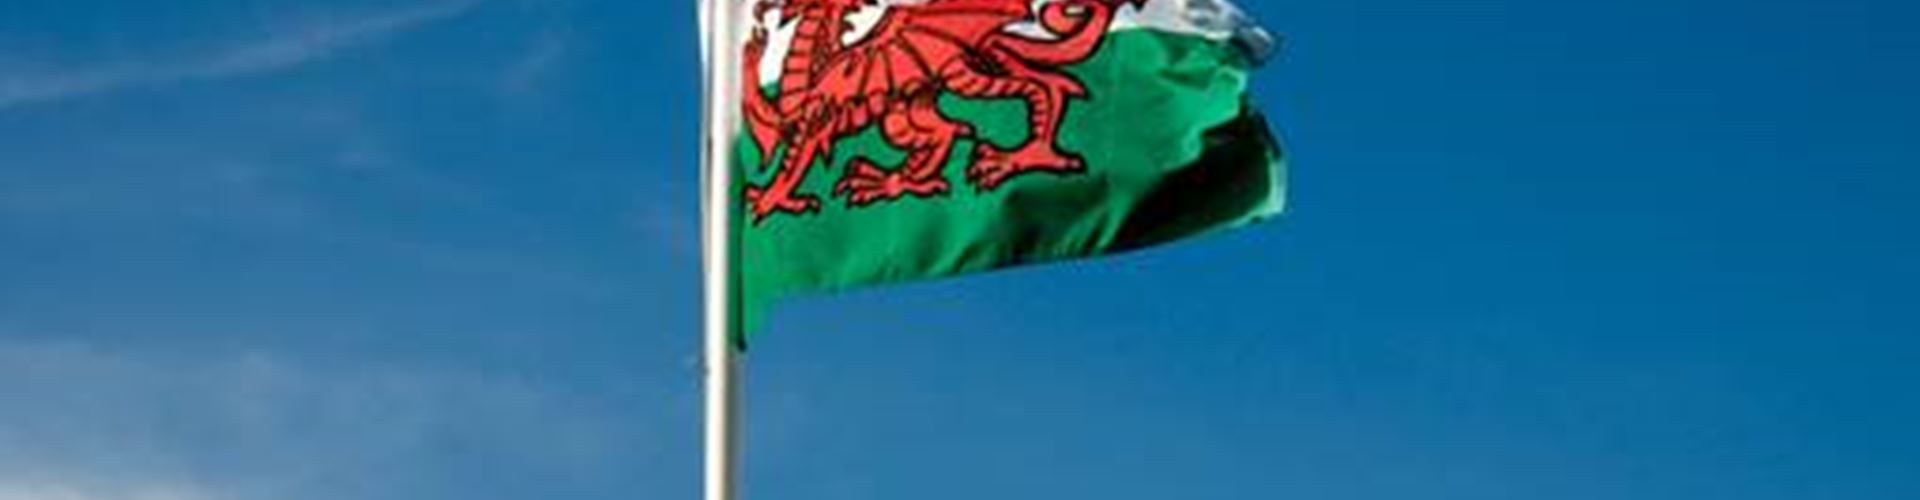 Wales is top spot for businesses in finance sector